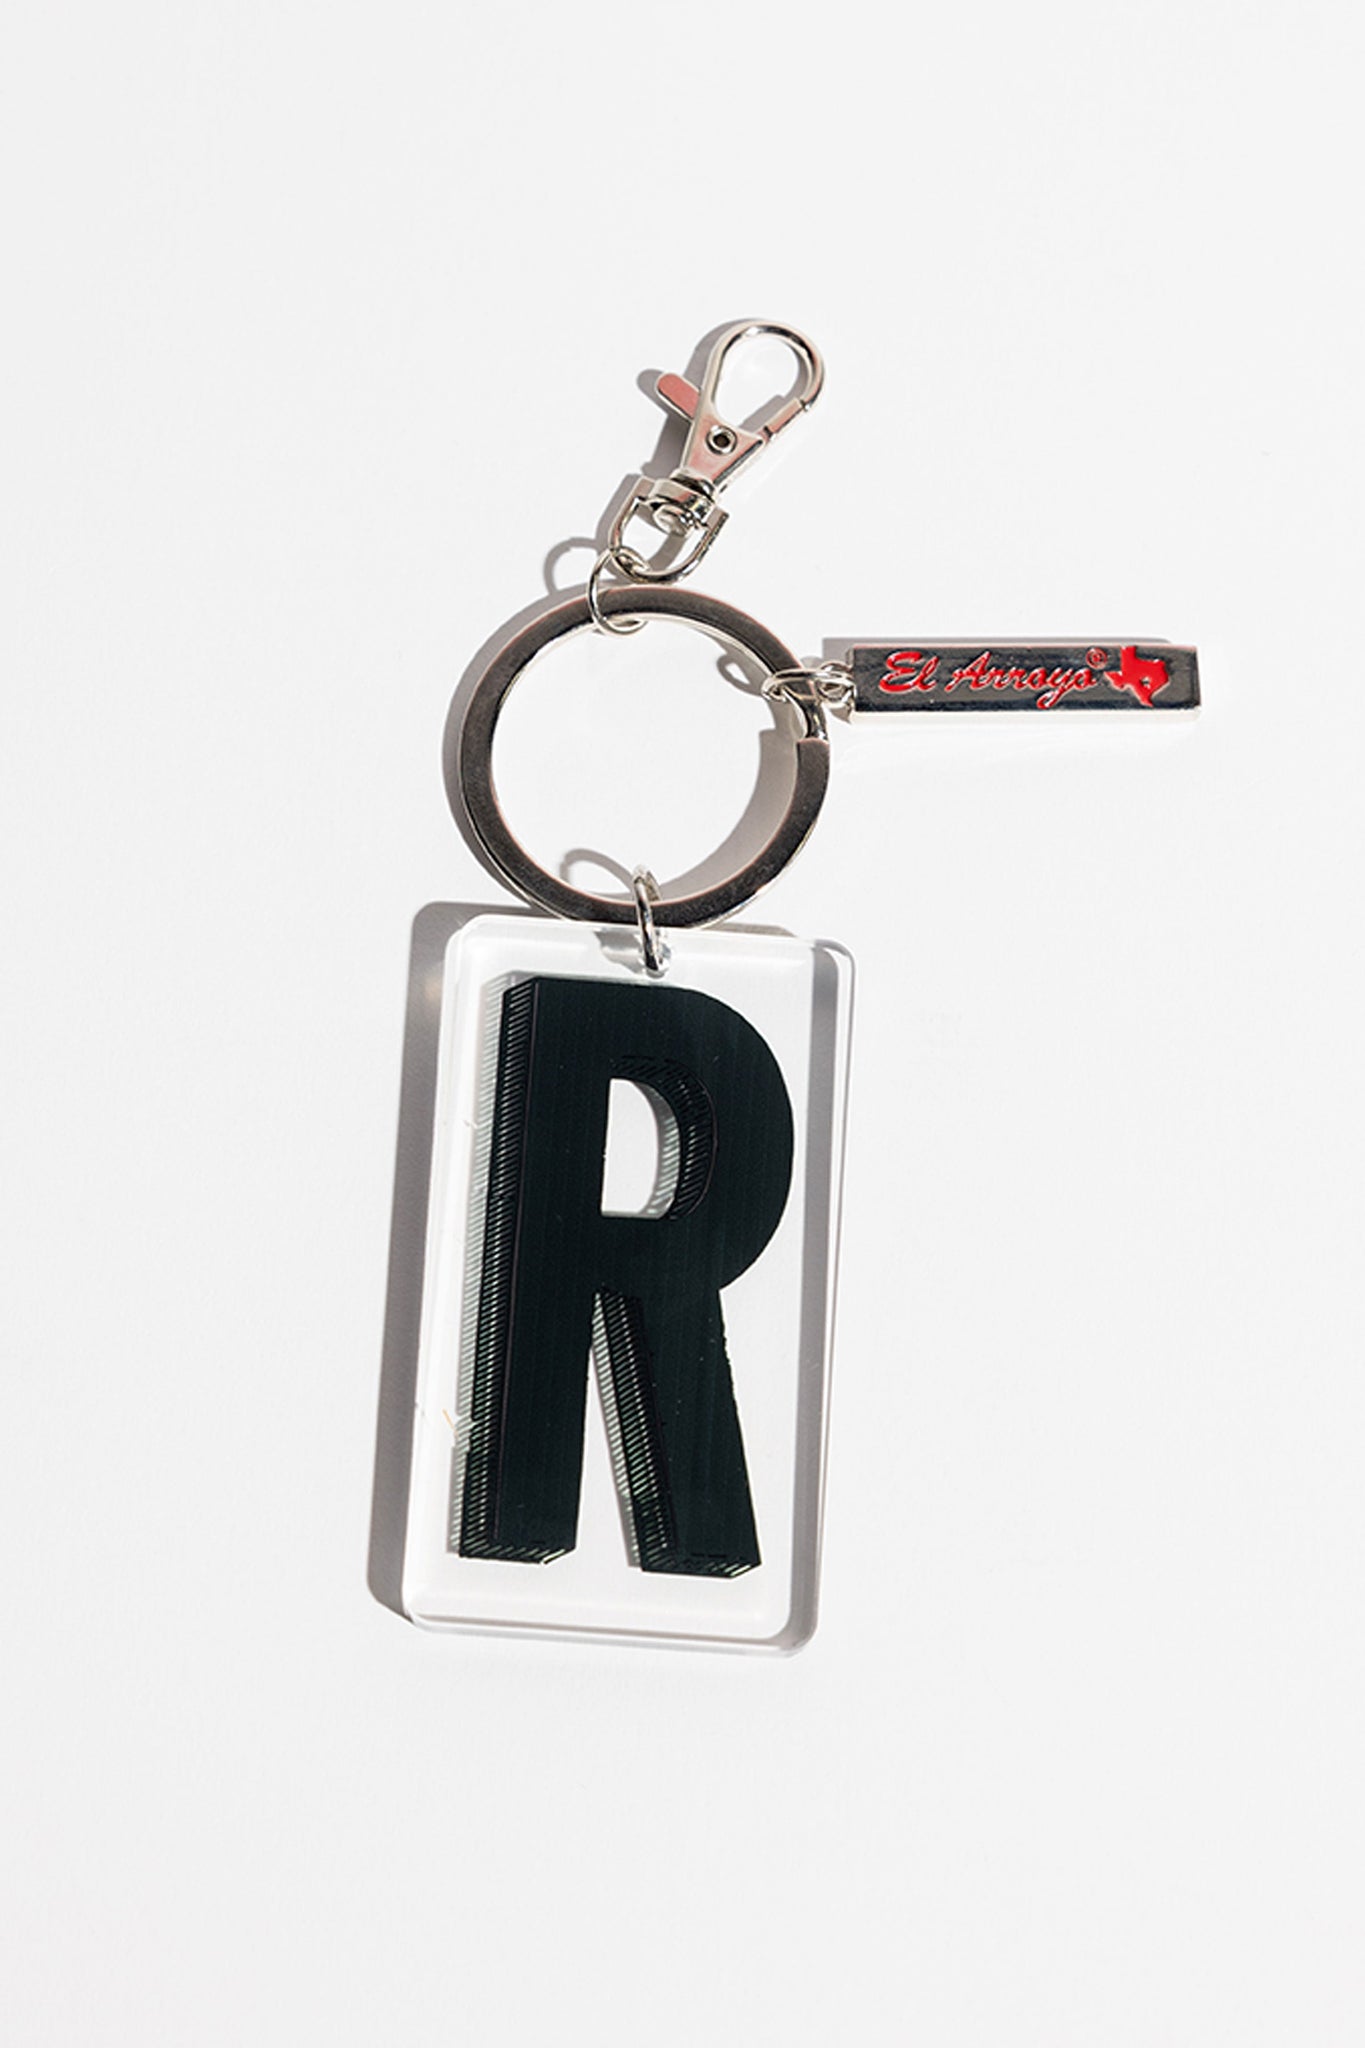 Marquee Letter Keychain - R